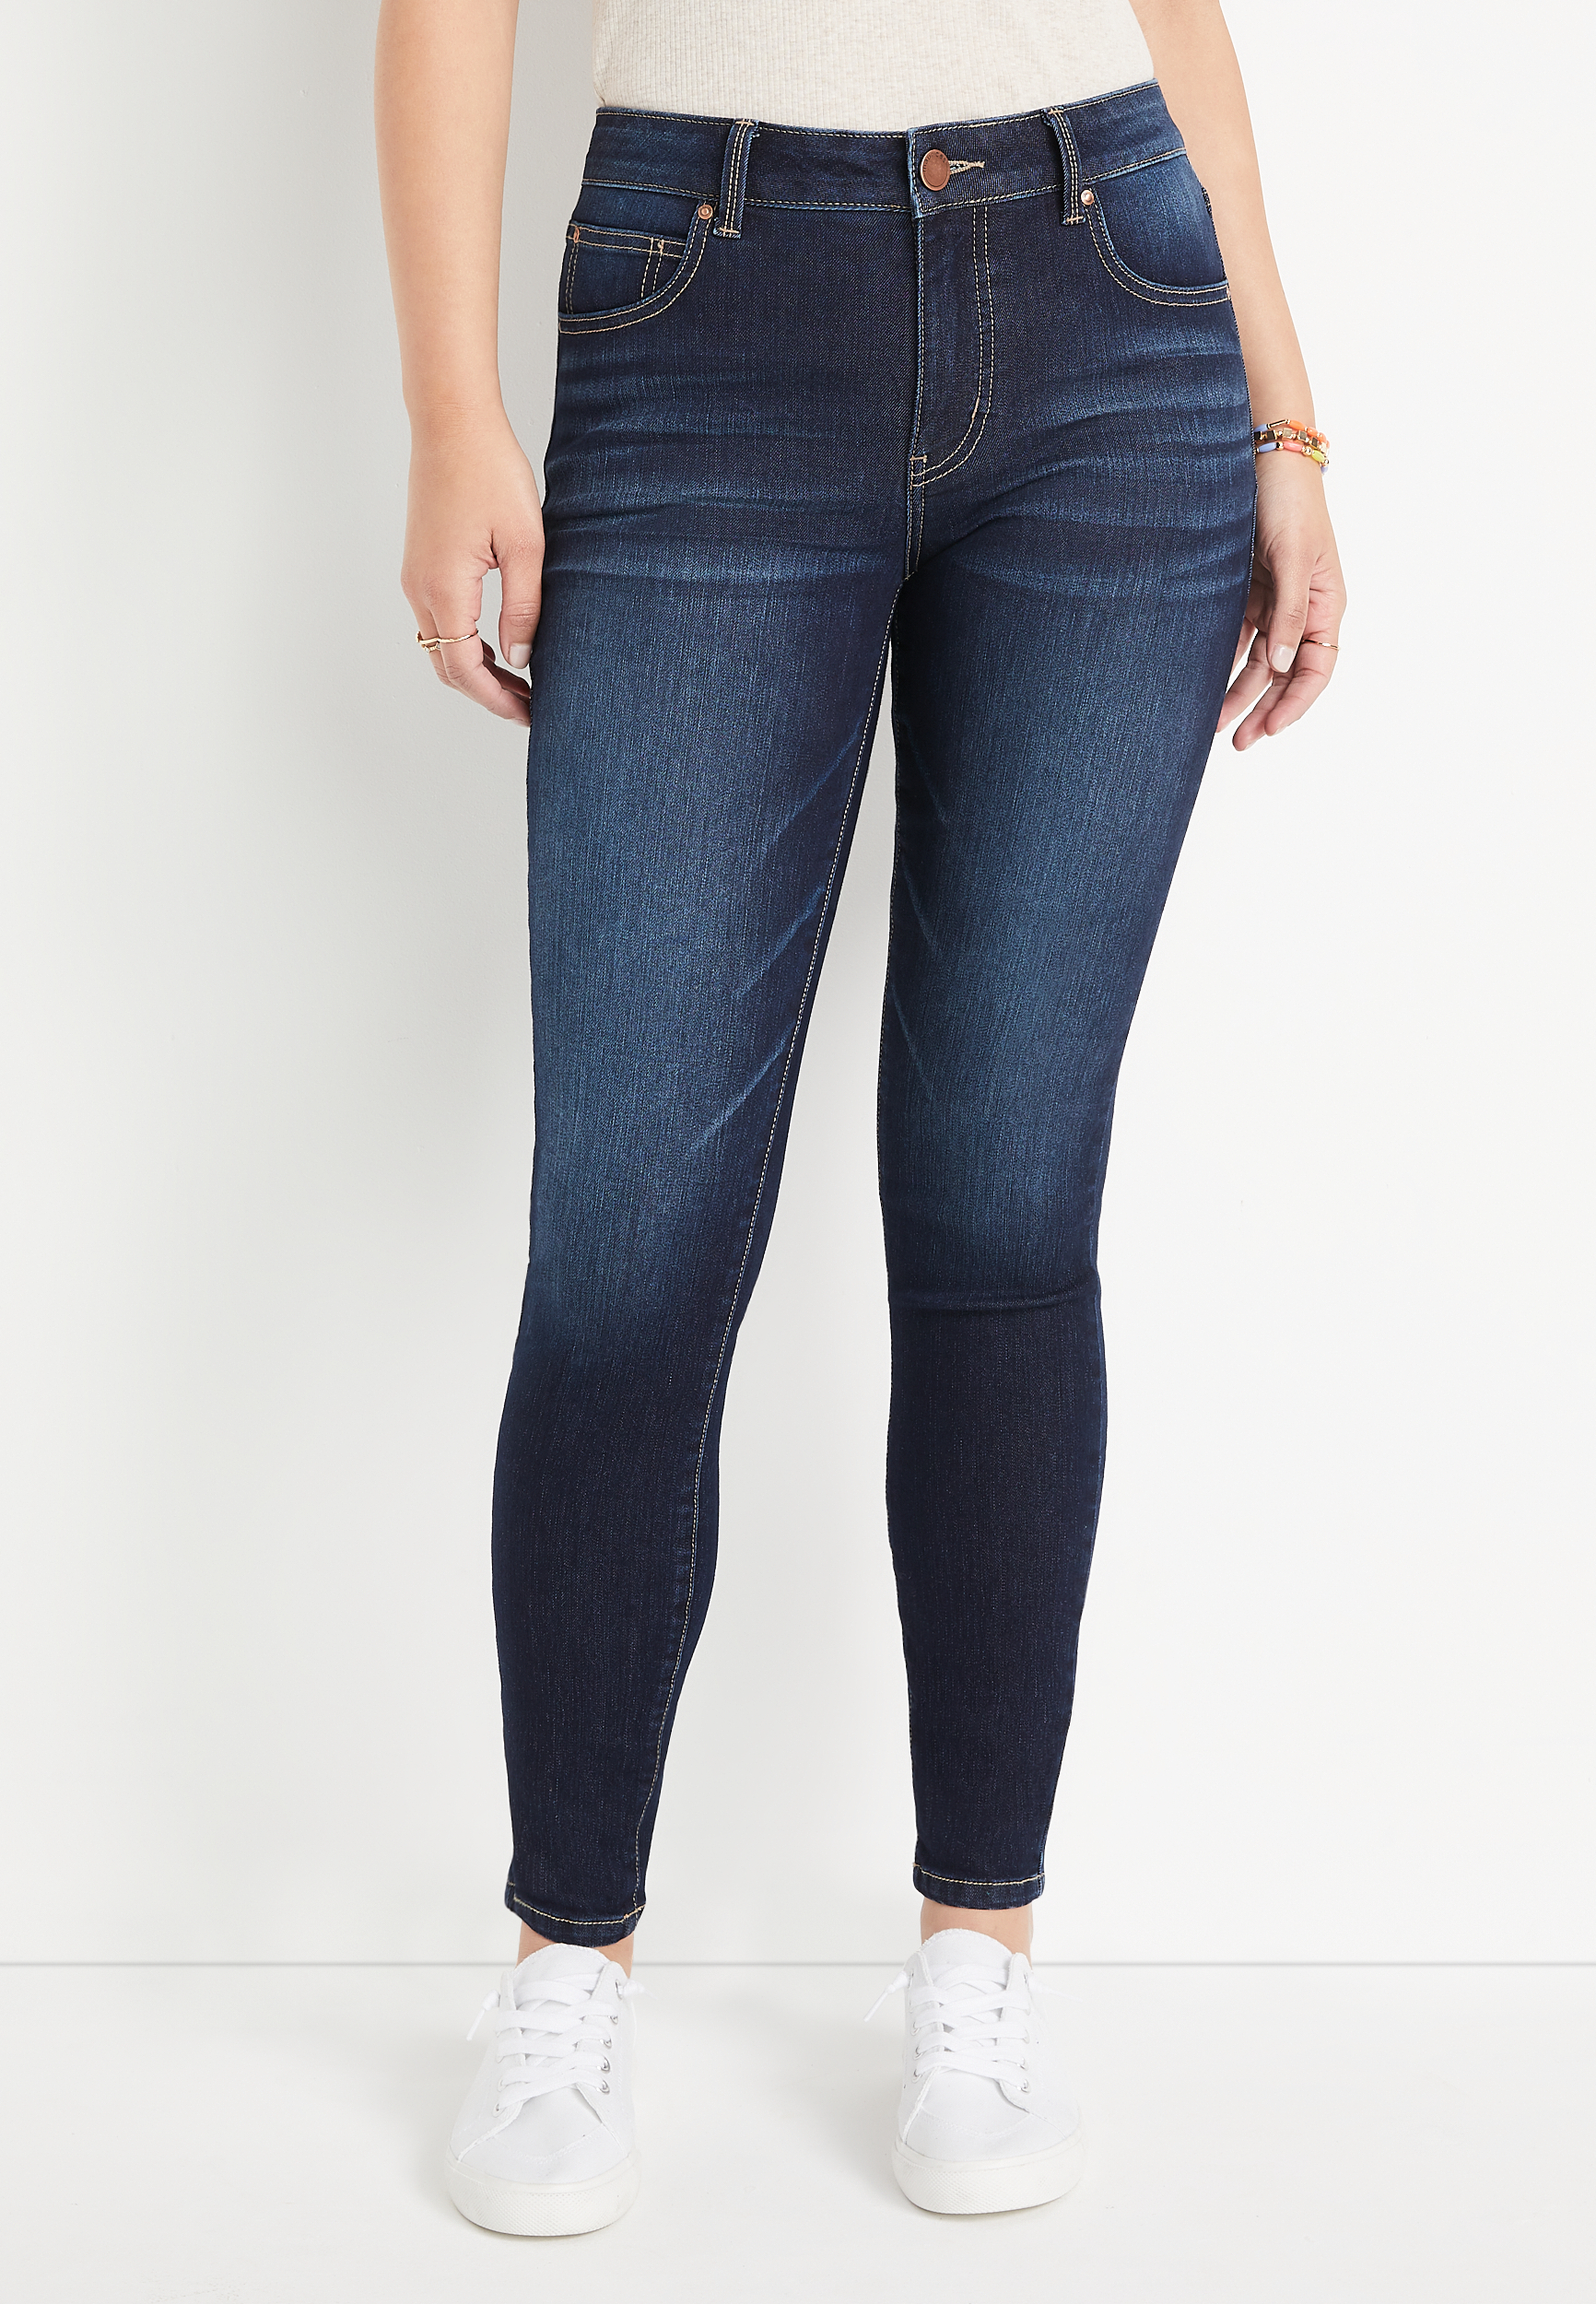 Tien jaar Automatisch Polair m jeans by maurices™ Everflex™ Super Skinny High Rise Stretch Jean |  maurices